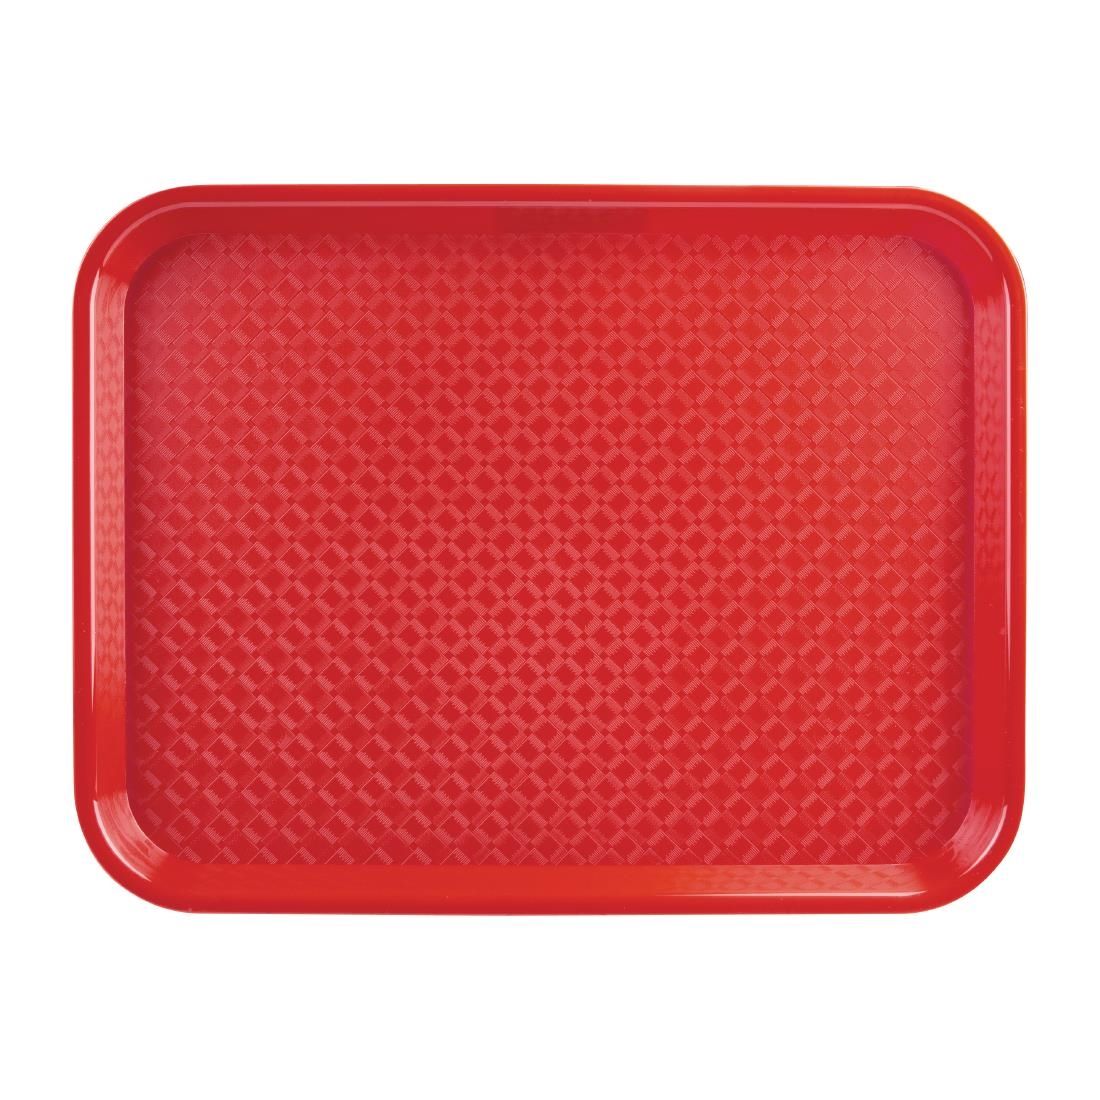 DP213 Kristallon Polypropylene Fast Food Tray Red Small 345mm JD Catering Equipment Solutions Ltd